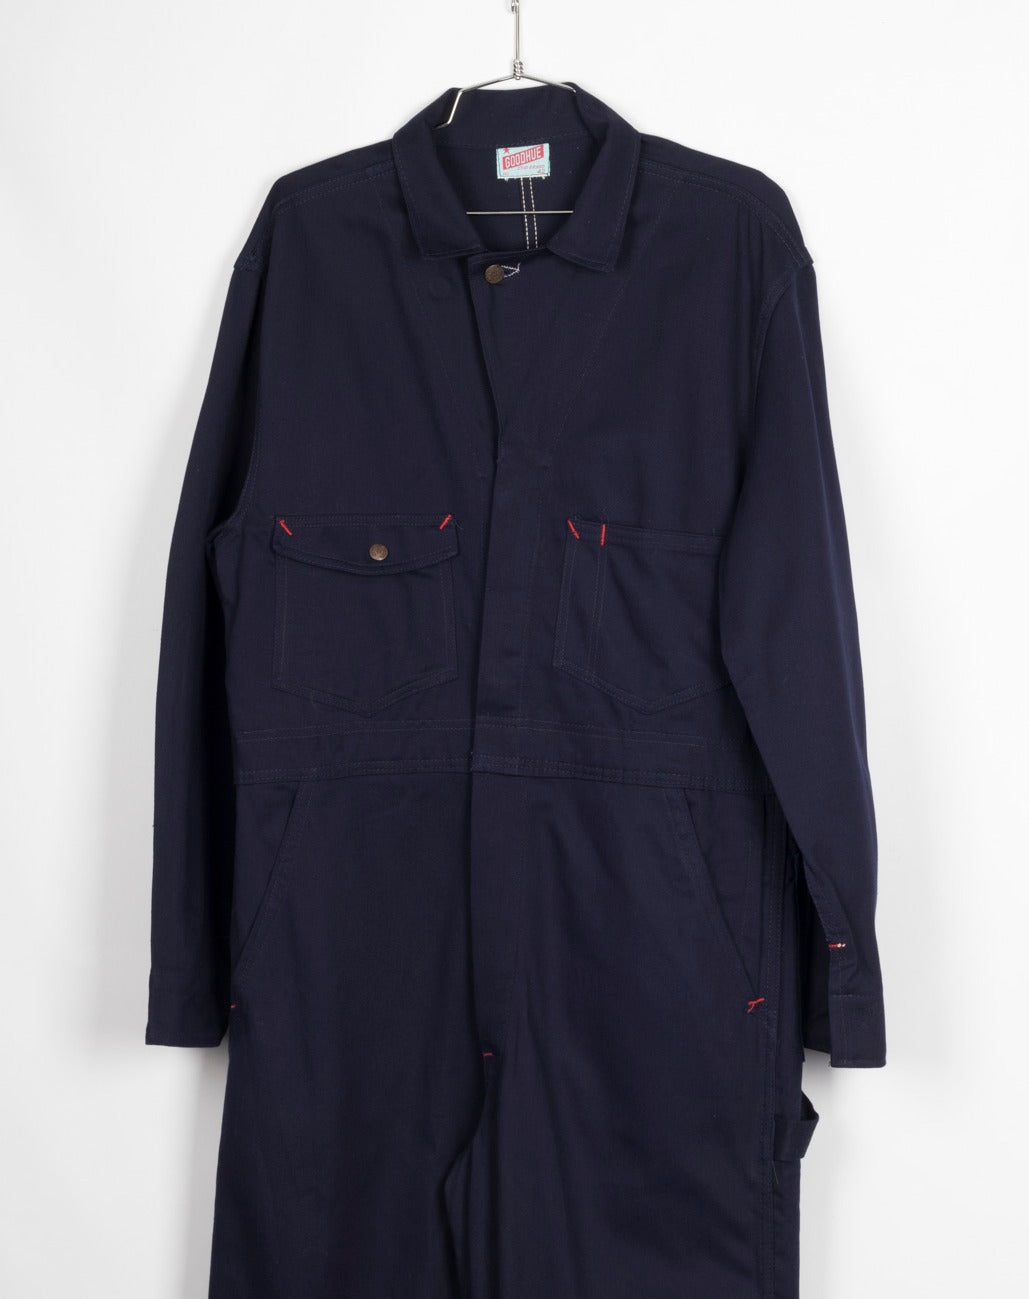 Navy Goodhue coveralls - large